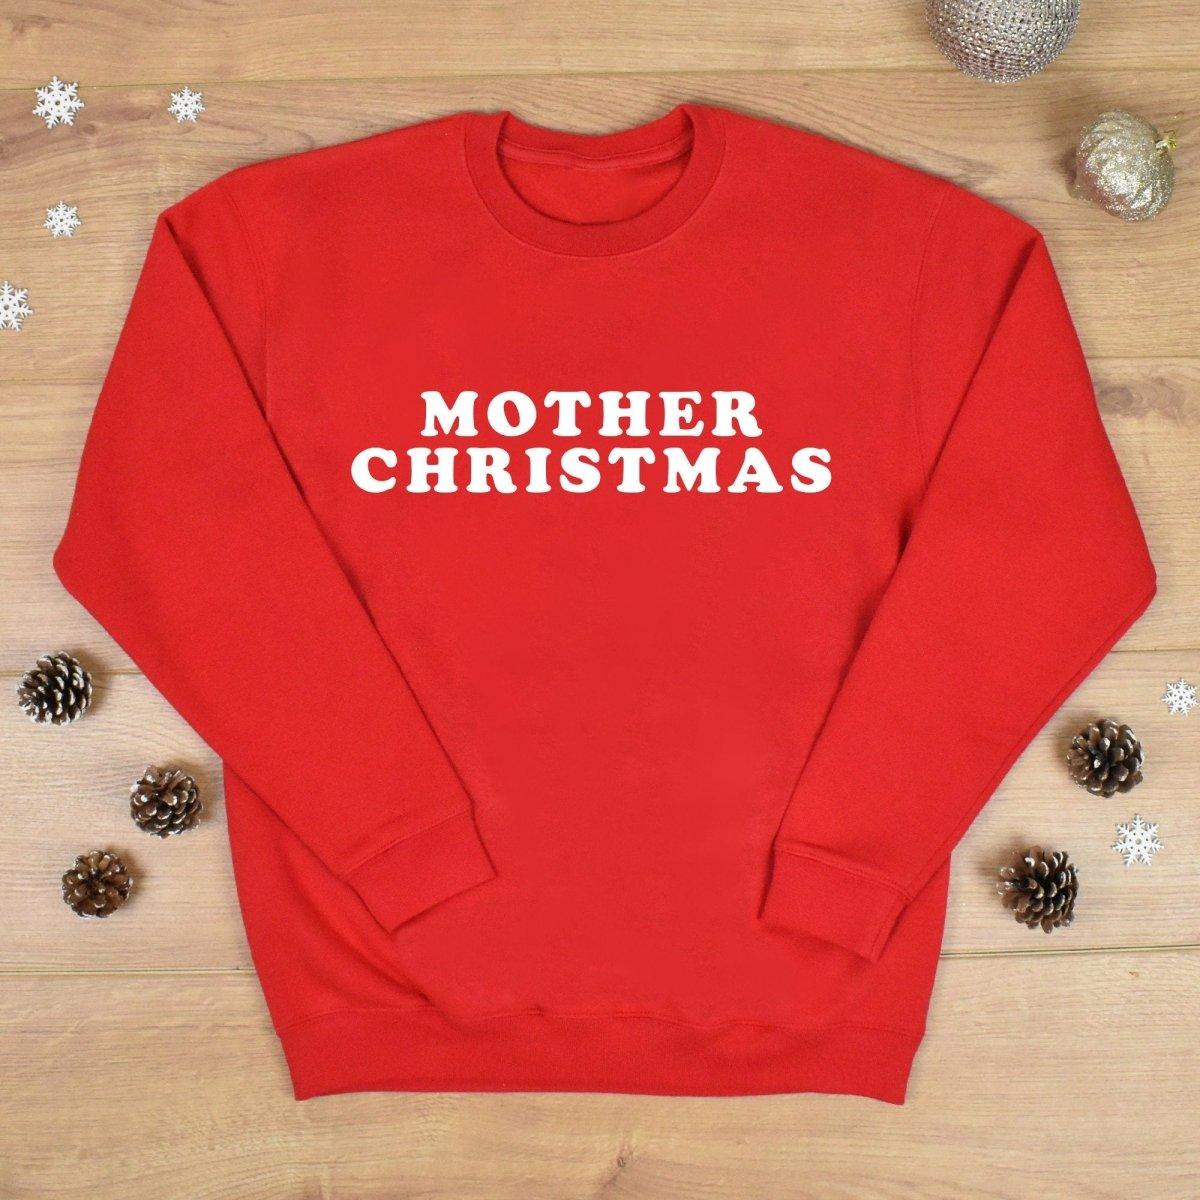 Family Christmas Sweaters, Personalised Christmas Sweater, Family Christmas Jumper, Child Xmas Sweater, Matching Christmas Sweater, Xmas - Amy Lucy